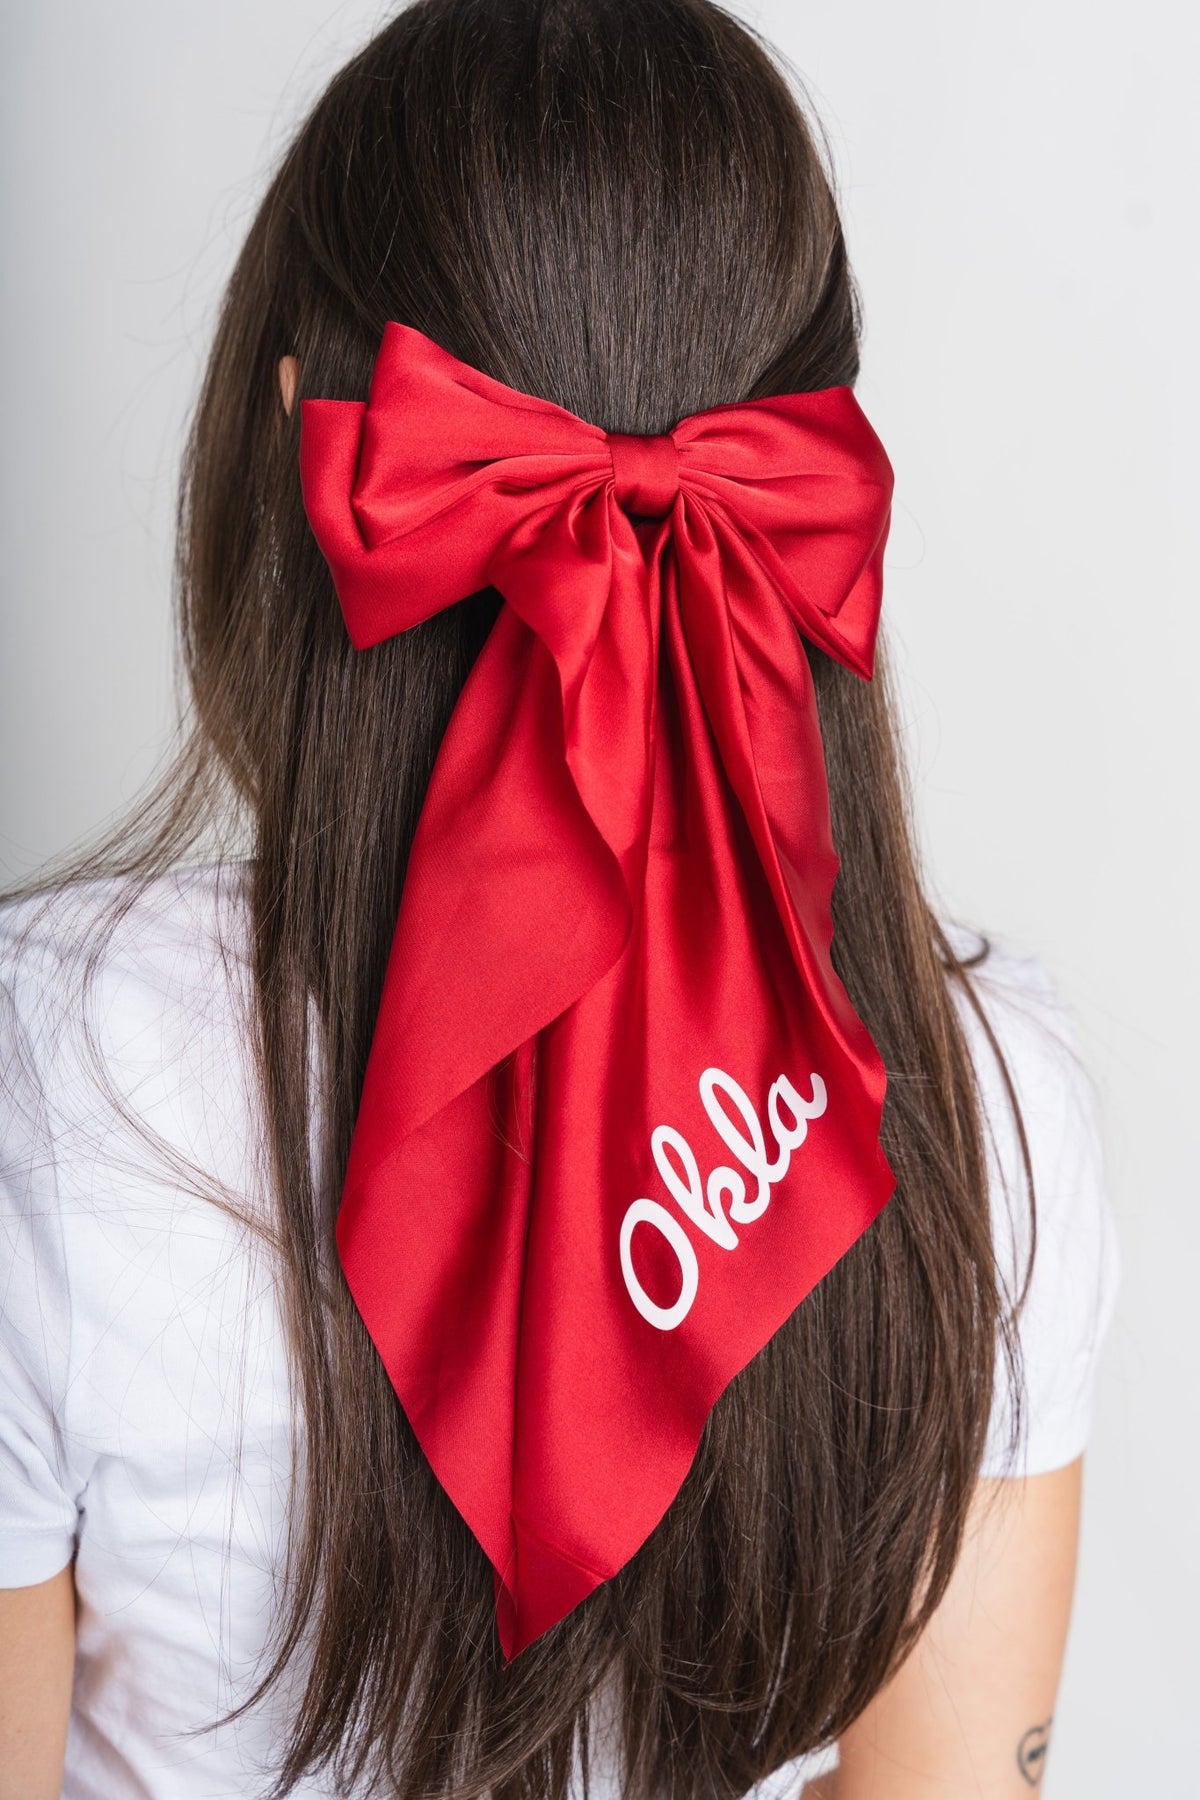 OKLA game day hair bow crimson - Trendy Gifts at Lush Fashion Lounge Boutique in Oklahoma City